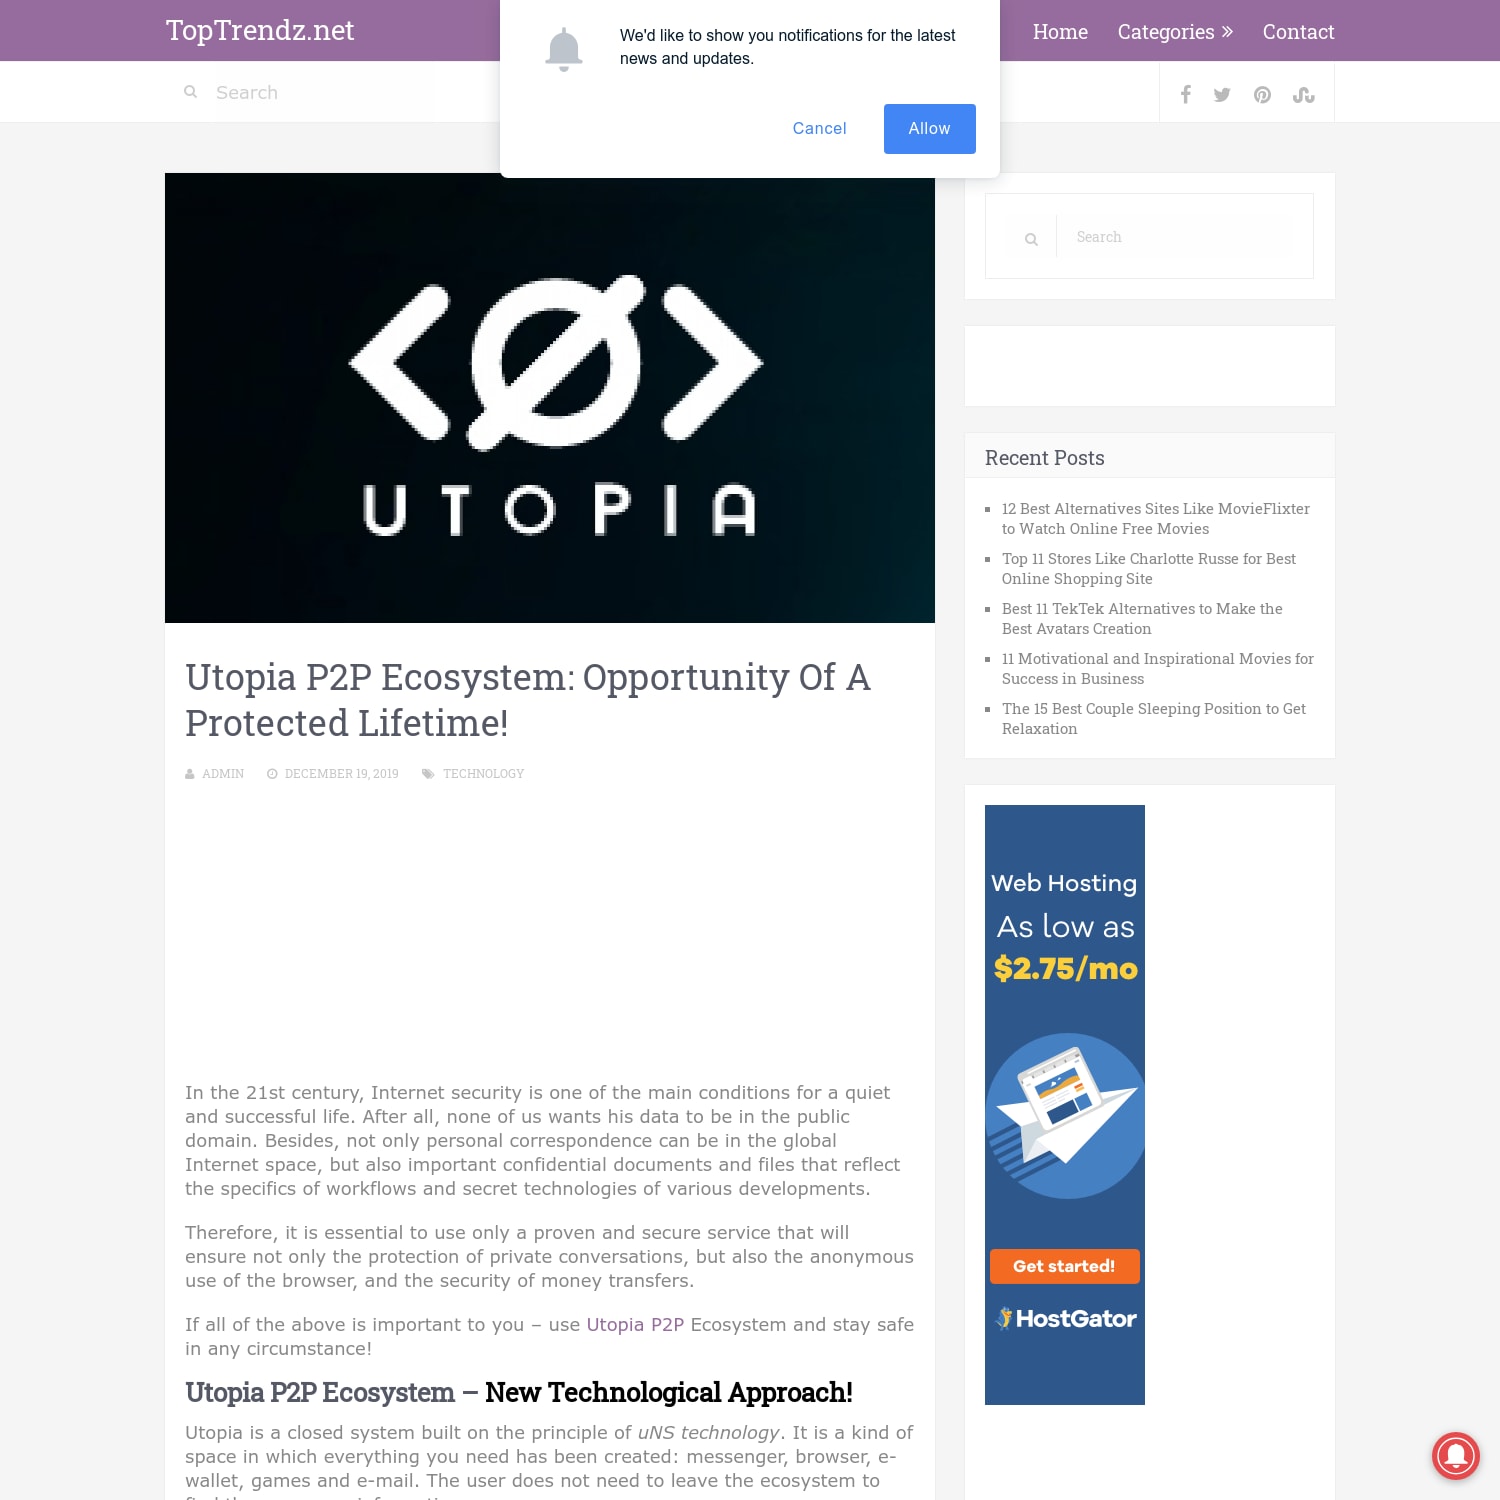 Utopia P2P Ecosystem: Opportunity Of A Protected Lifetime!